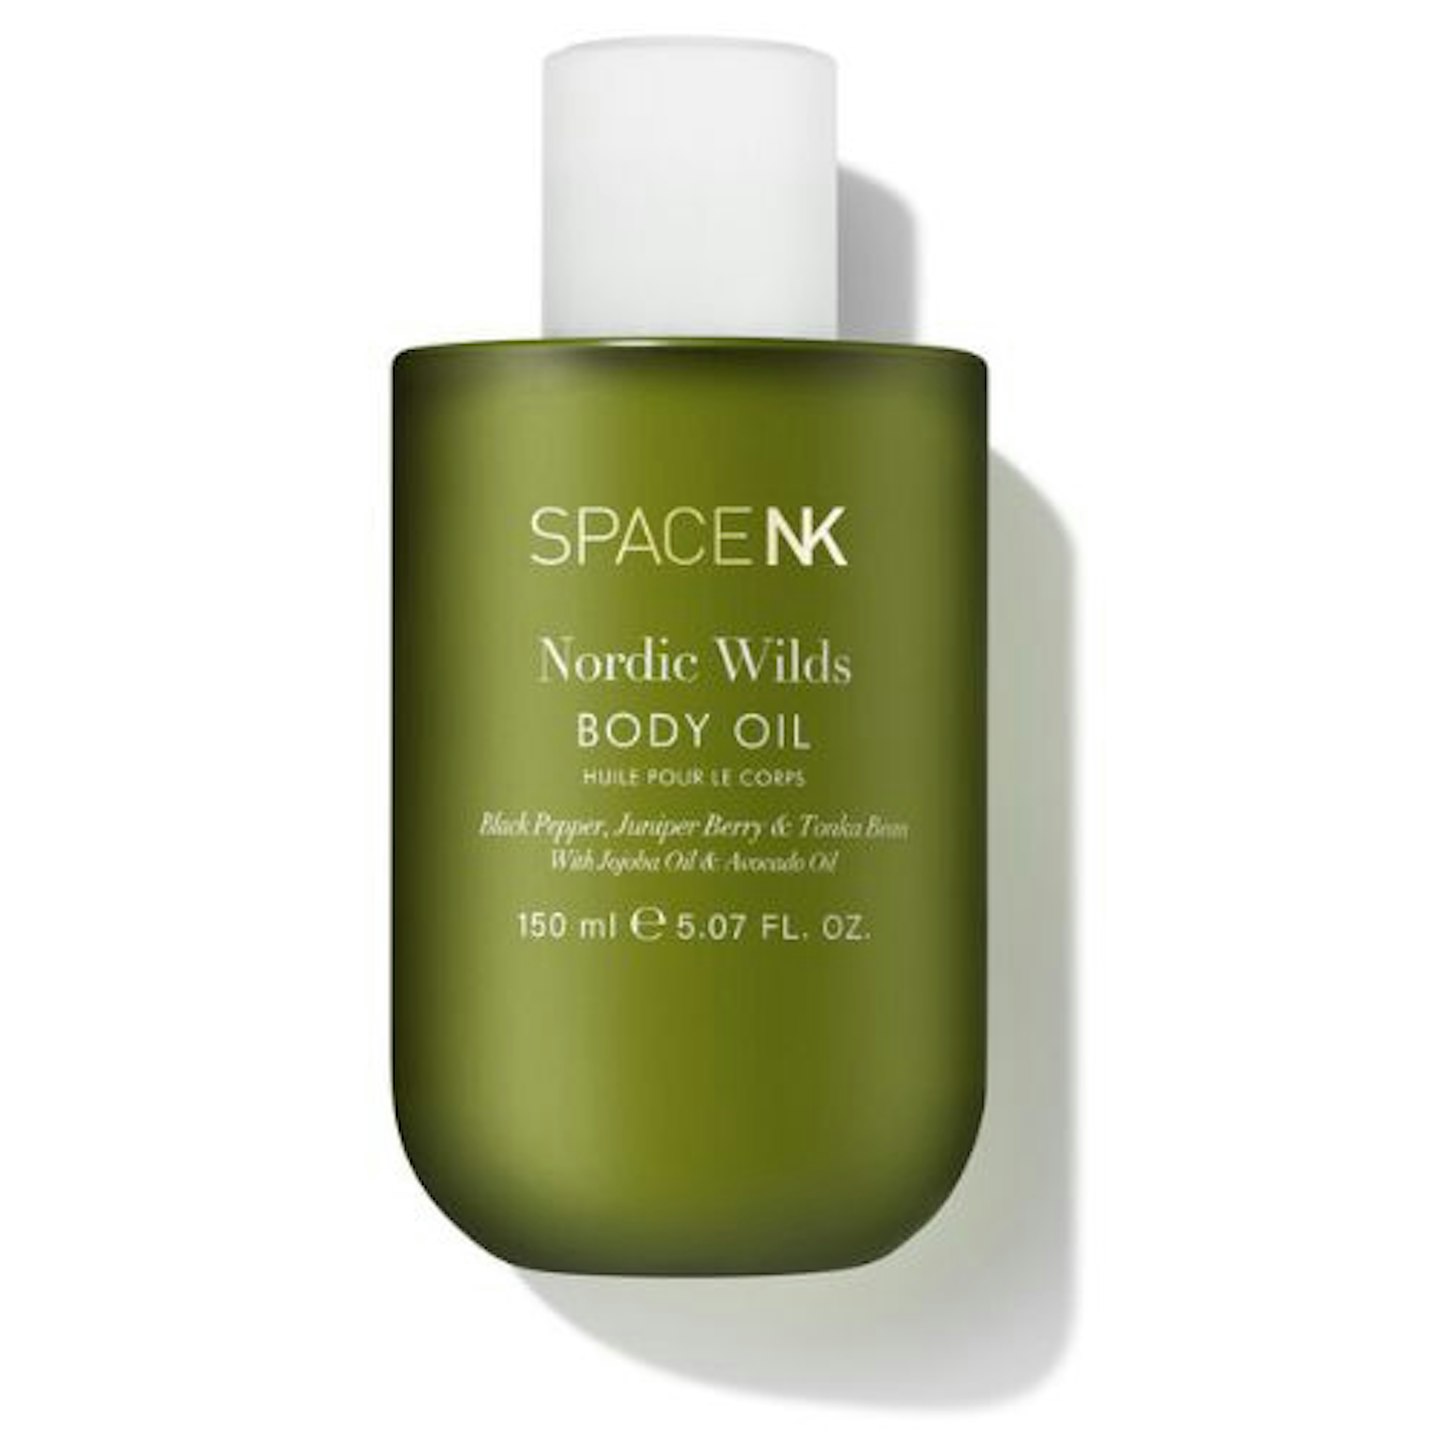 Space NK Nordic Wilds Body Oil